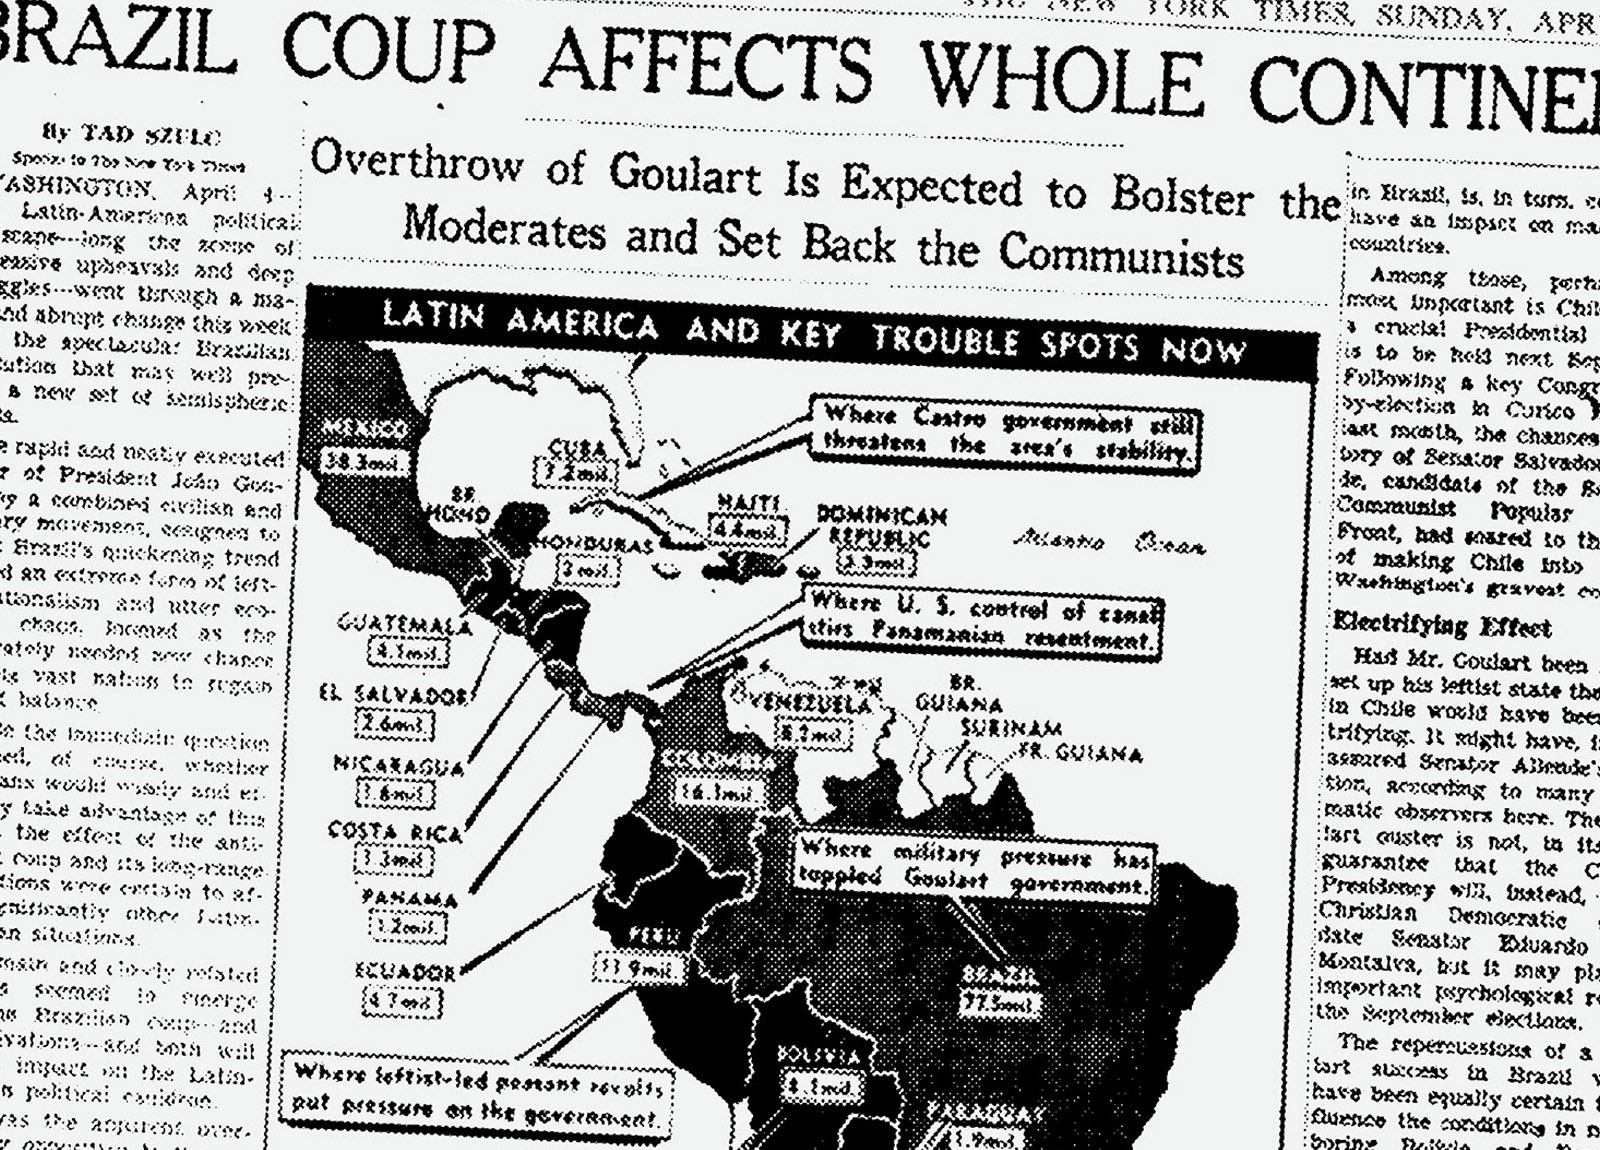 Illustration:
A New York Times article, from a 1964 paper, is blown up so that it extends beyond the edges of the frame. The headline reads: “Brazil Coup Affects Whole Continent.”